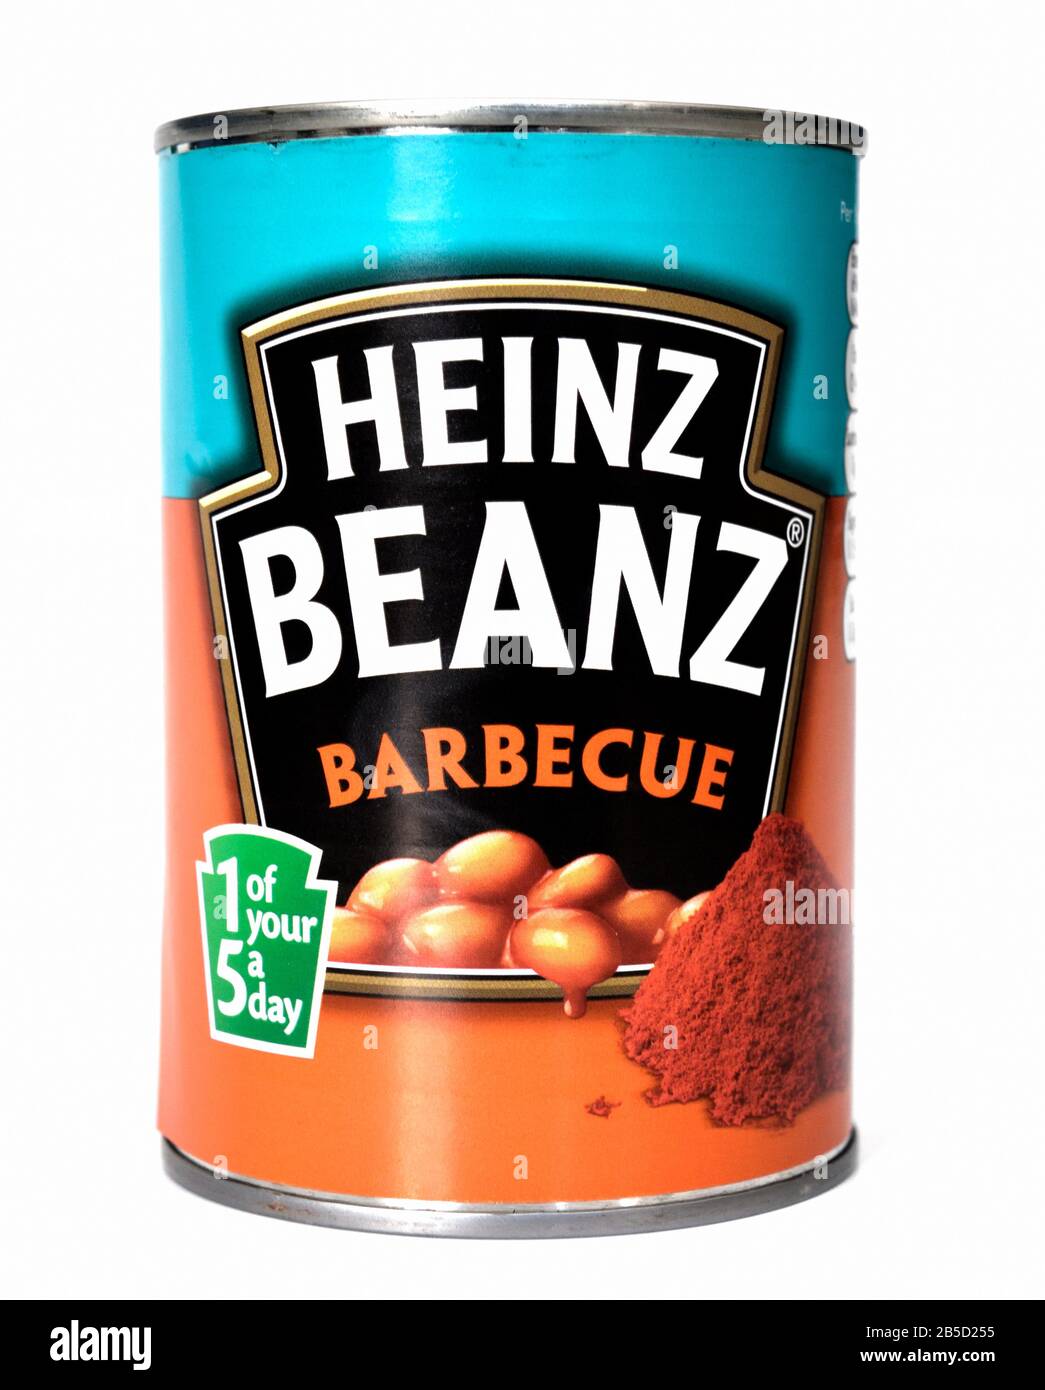 A tin of Heinz beans barbecue on a white background Stock Photo